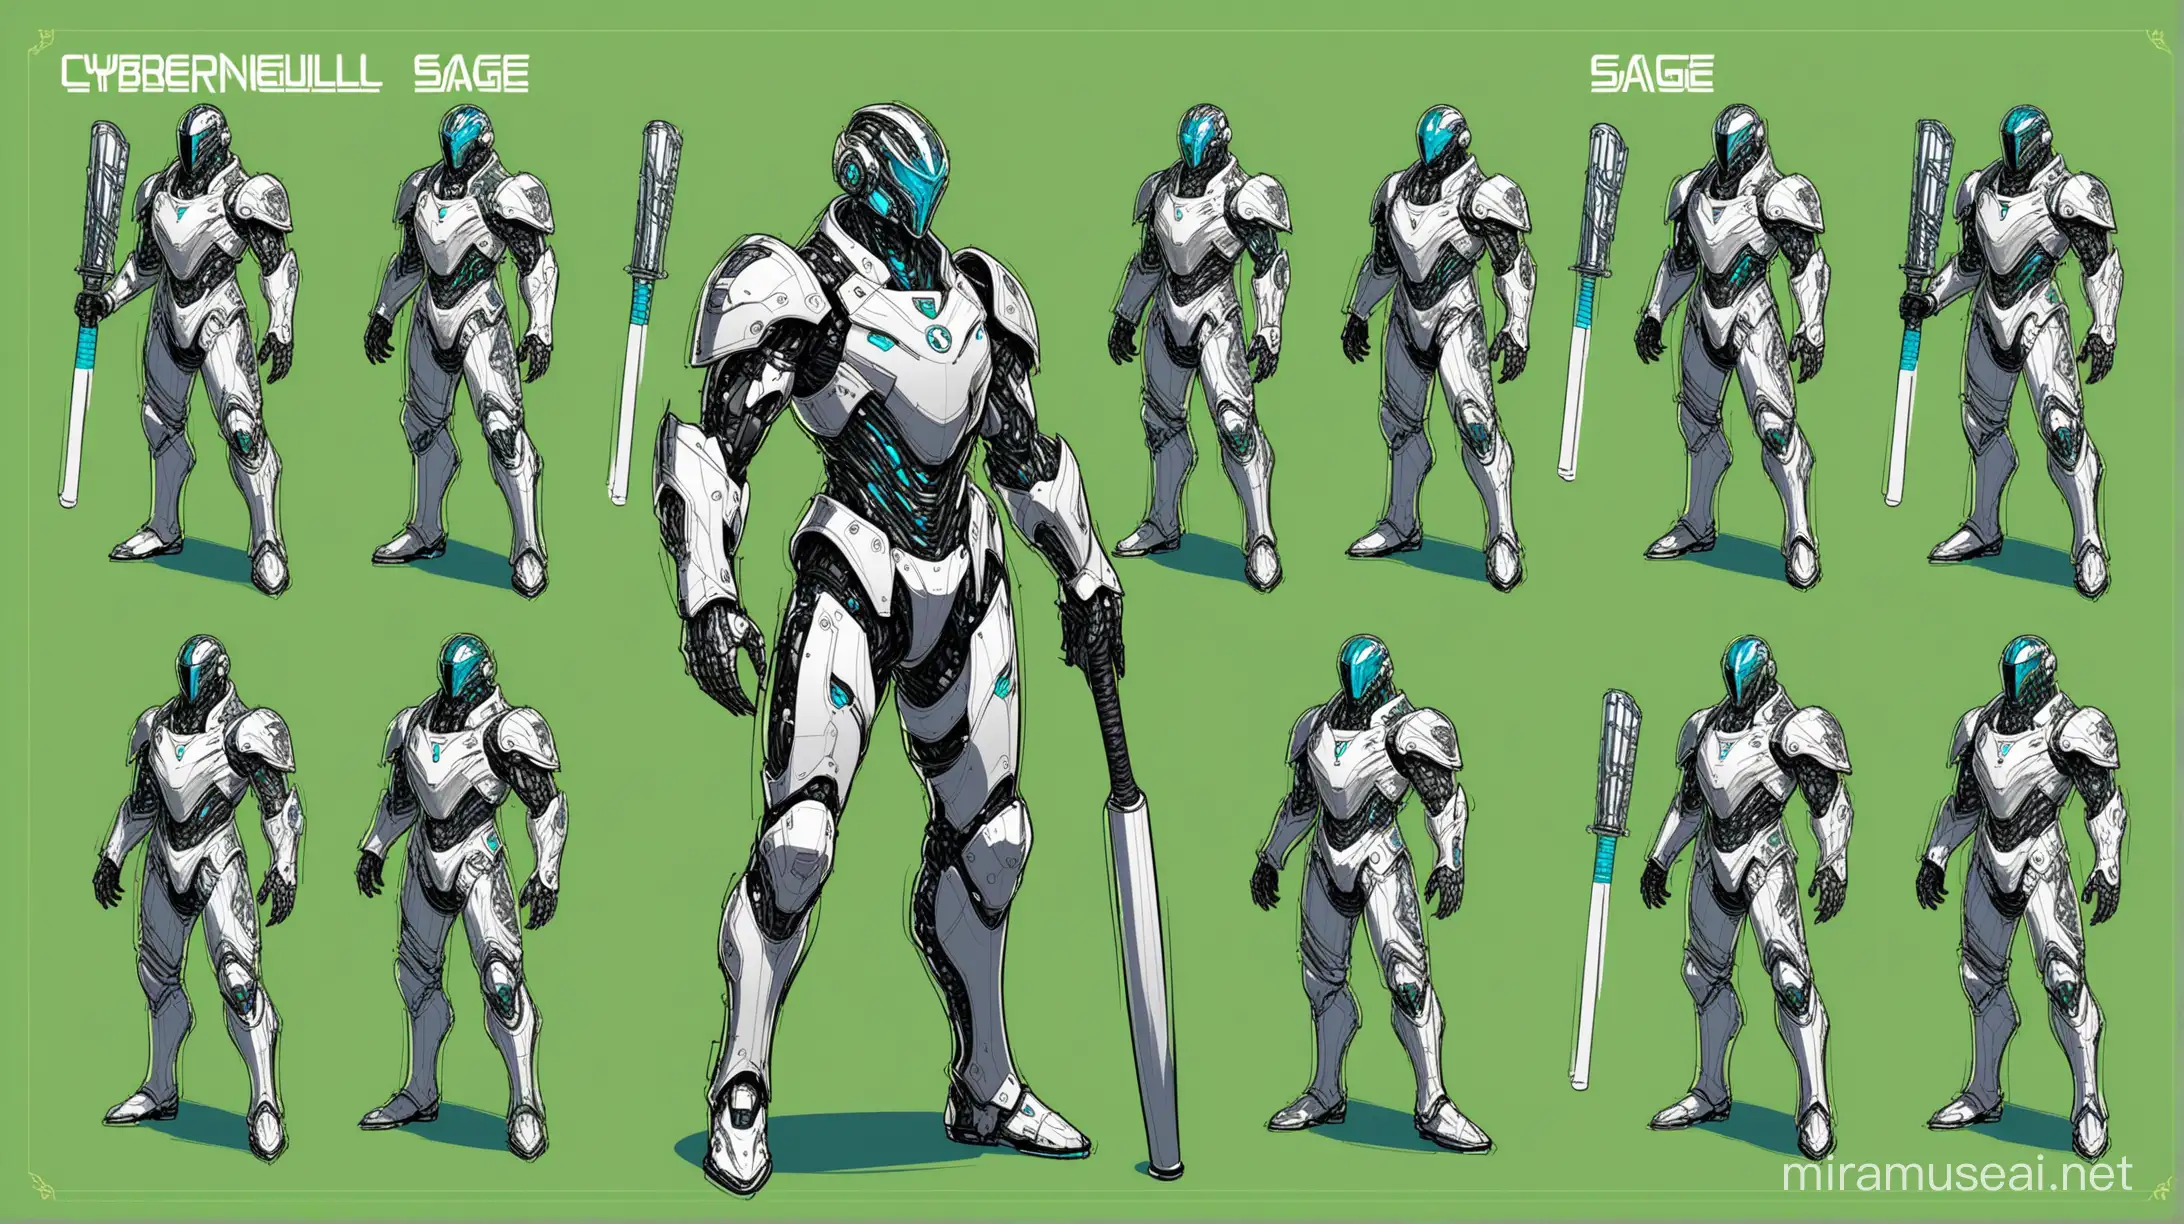 Cybernetic Business Suit Group Concept Art with Sage Background